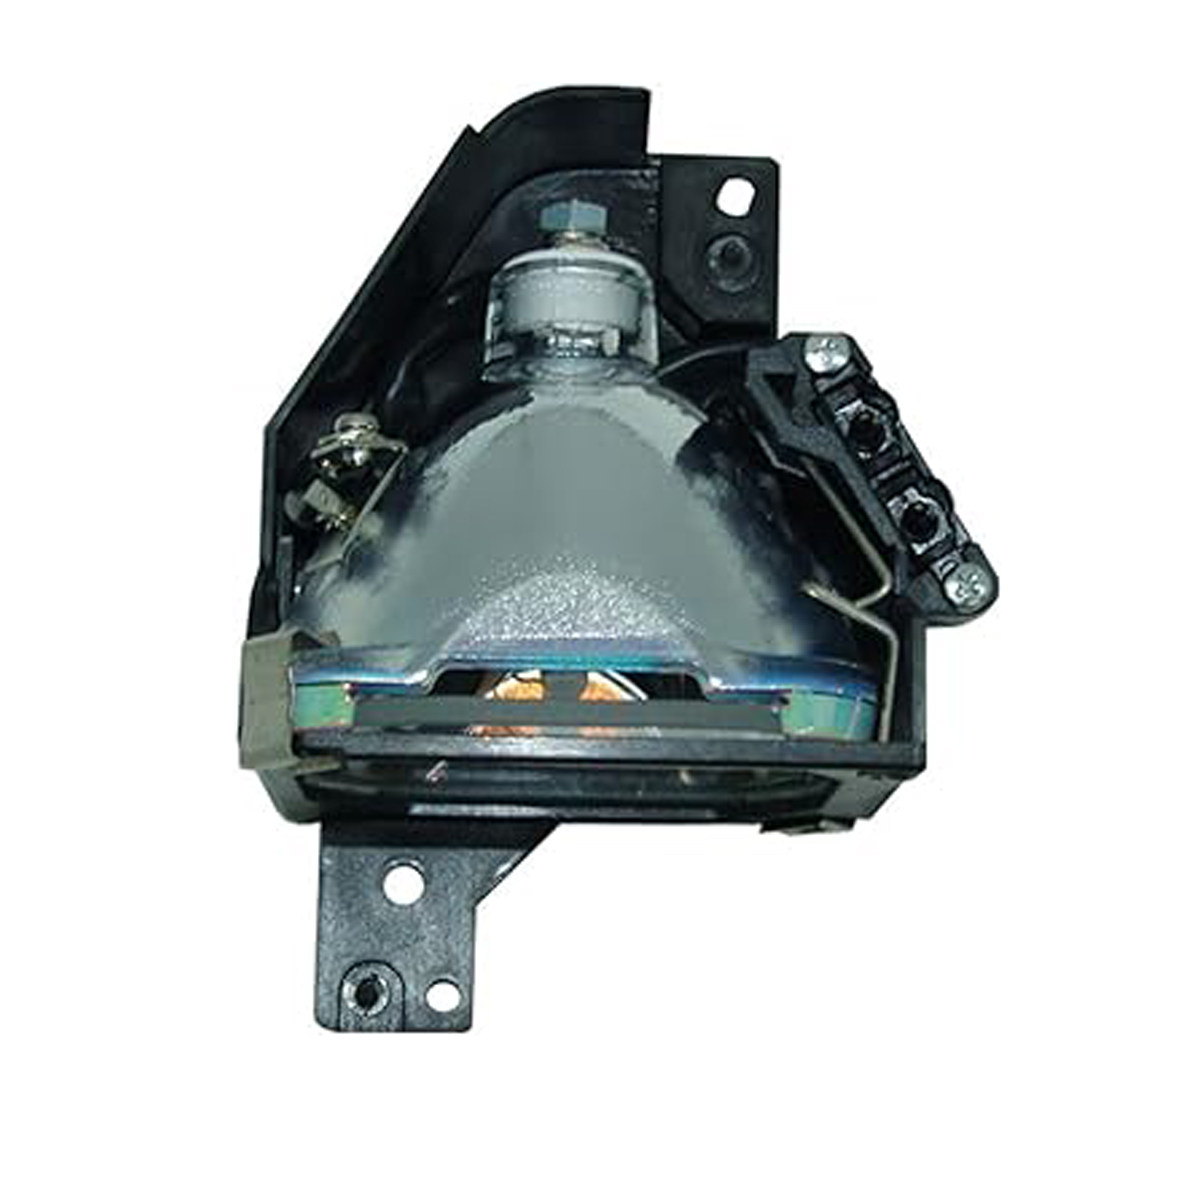 Replacement Projector lamp ELPLP16 For Epson EMP-51 EMP-51L EMP-71